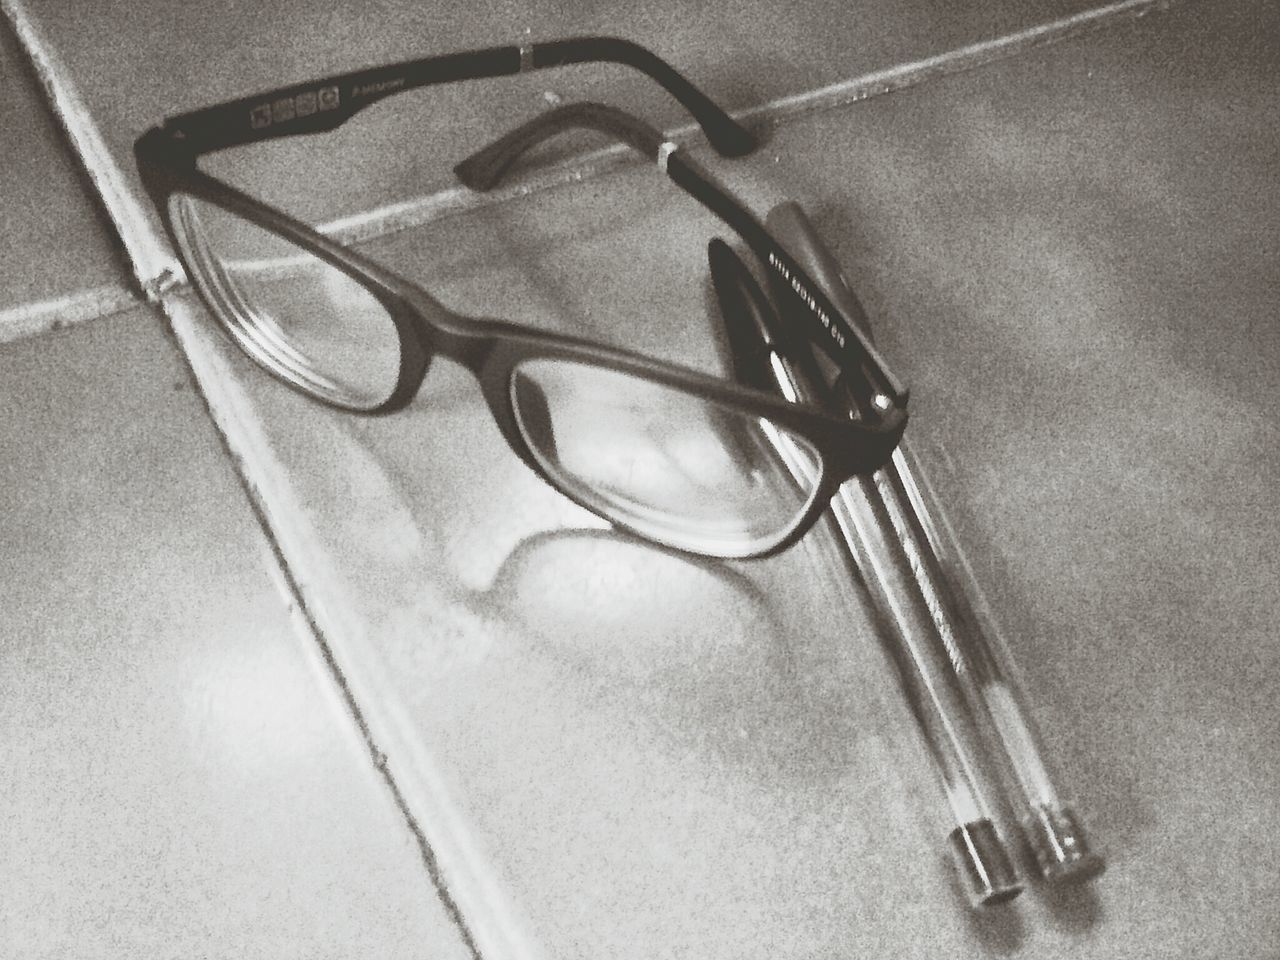 indoors, still life, high angle view, close-up, metal, one person, table, single object, handle, technology, part of, directly above, shadow, wall - building feature, fashion, connection, domestic bathroom, eyeglasses, absence